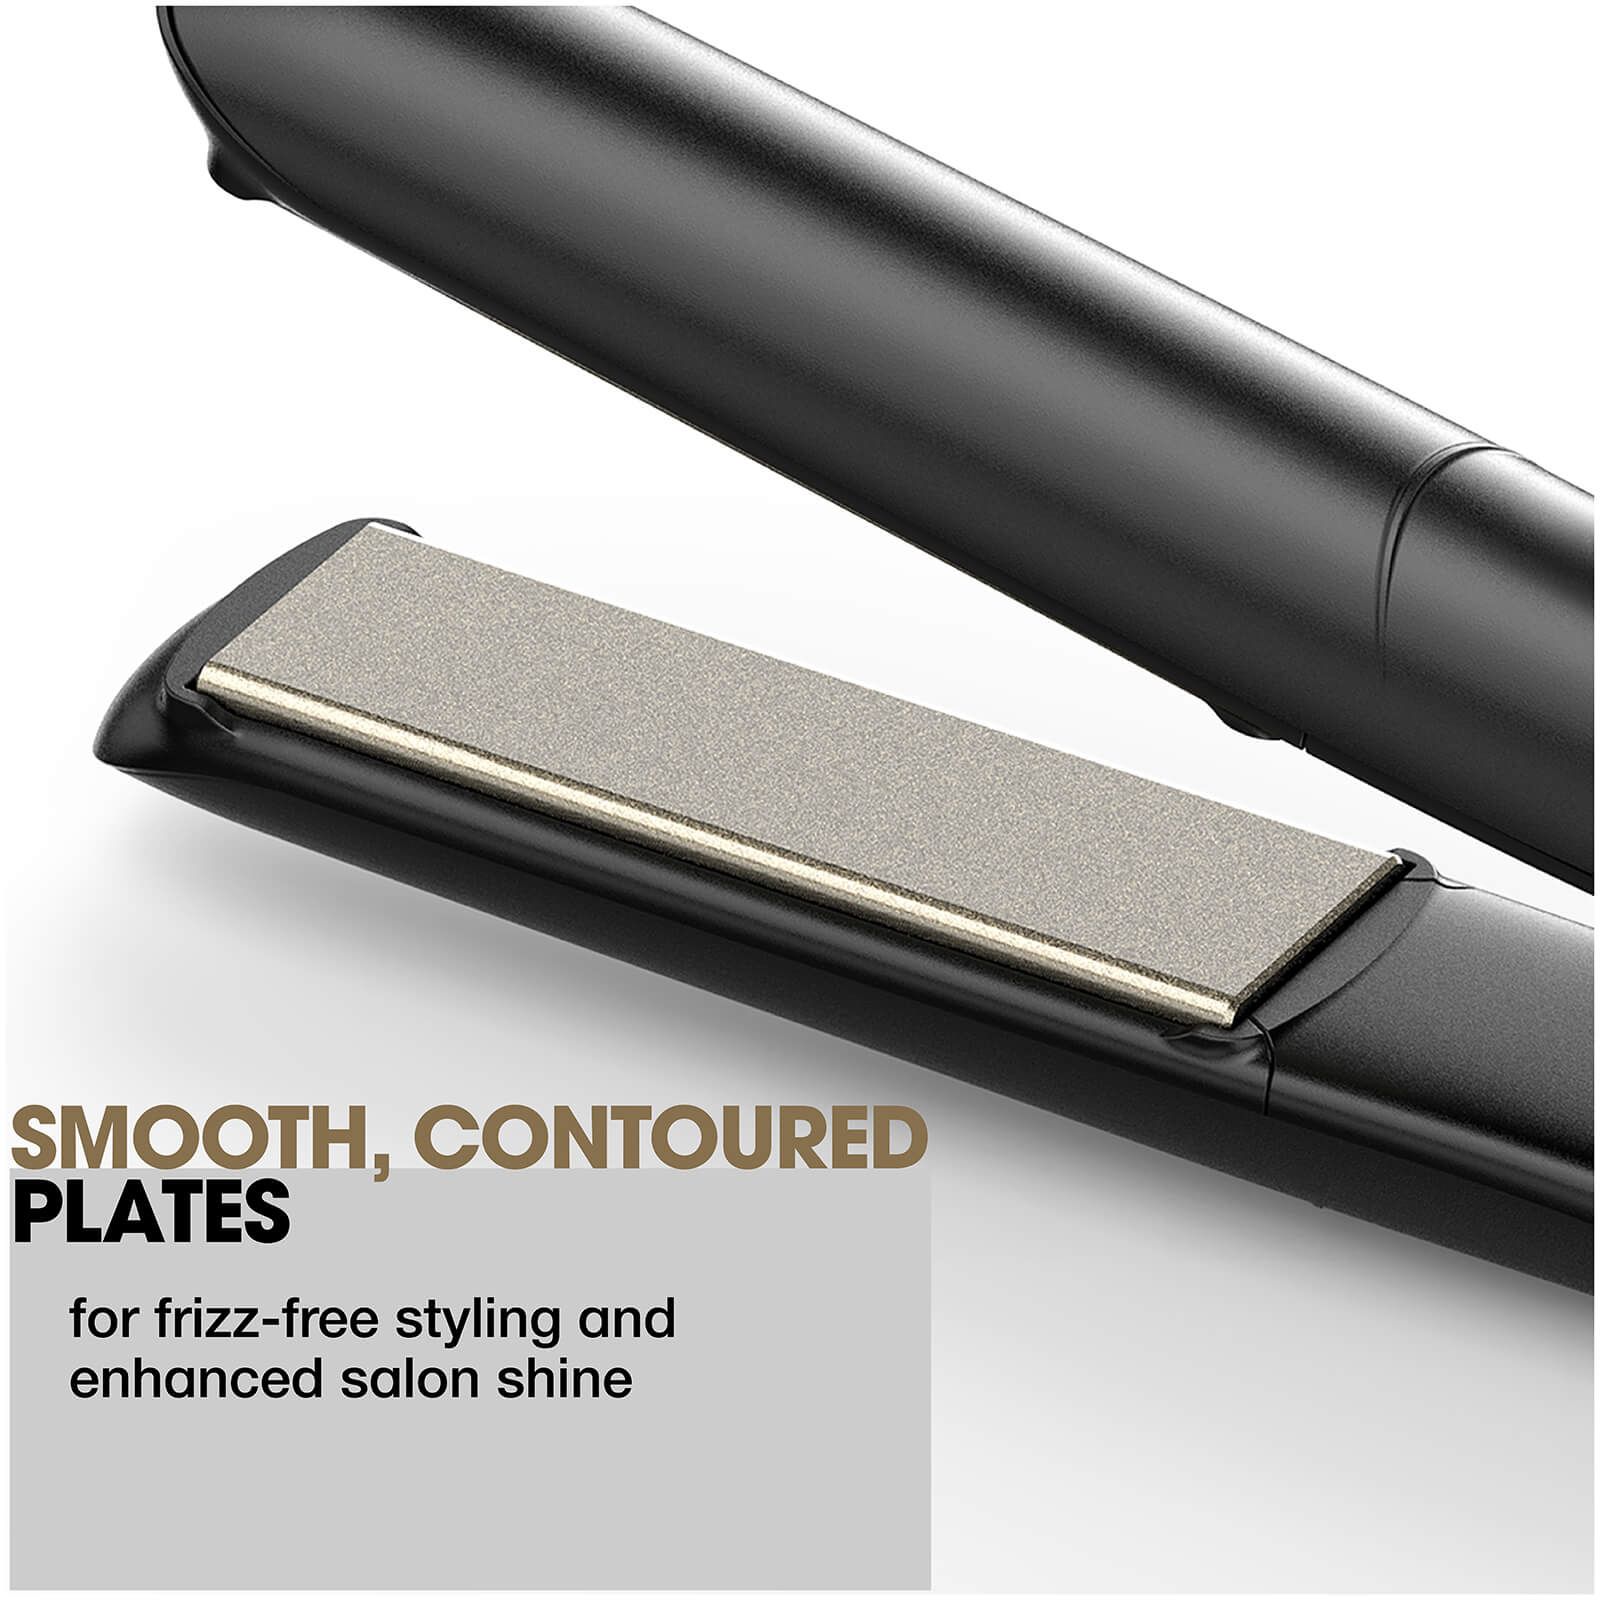 ghd smooth, contoured floating plates